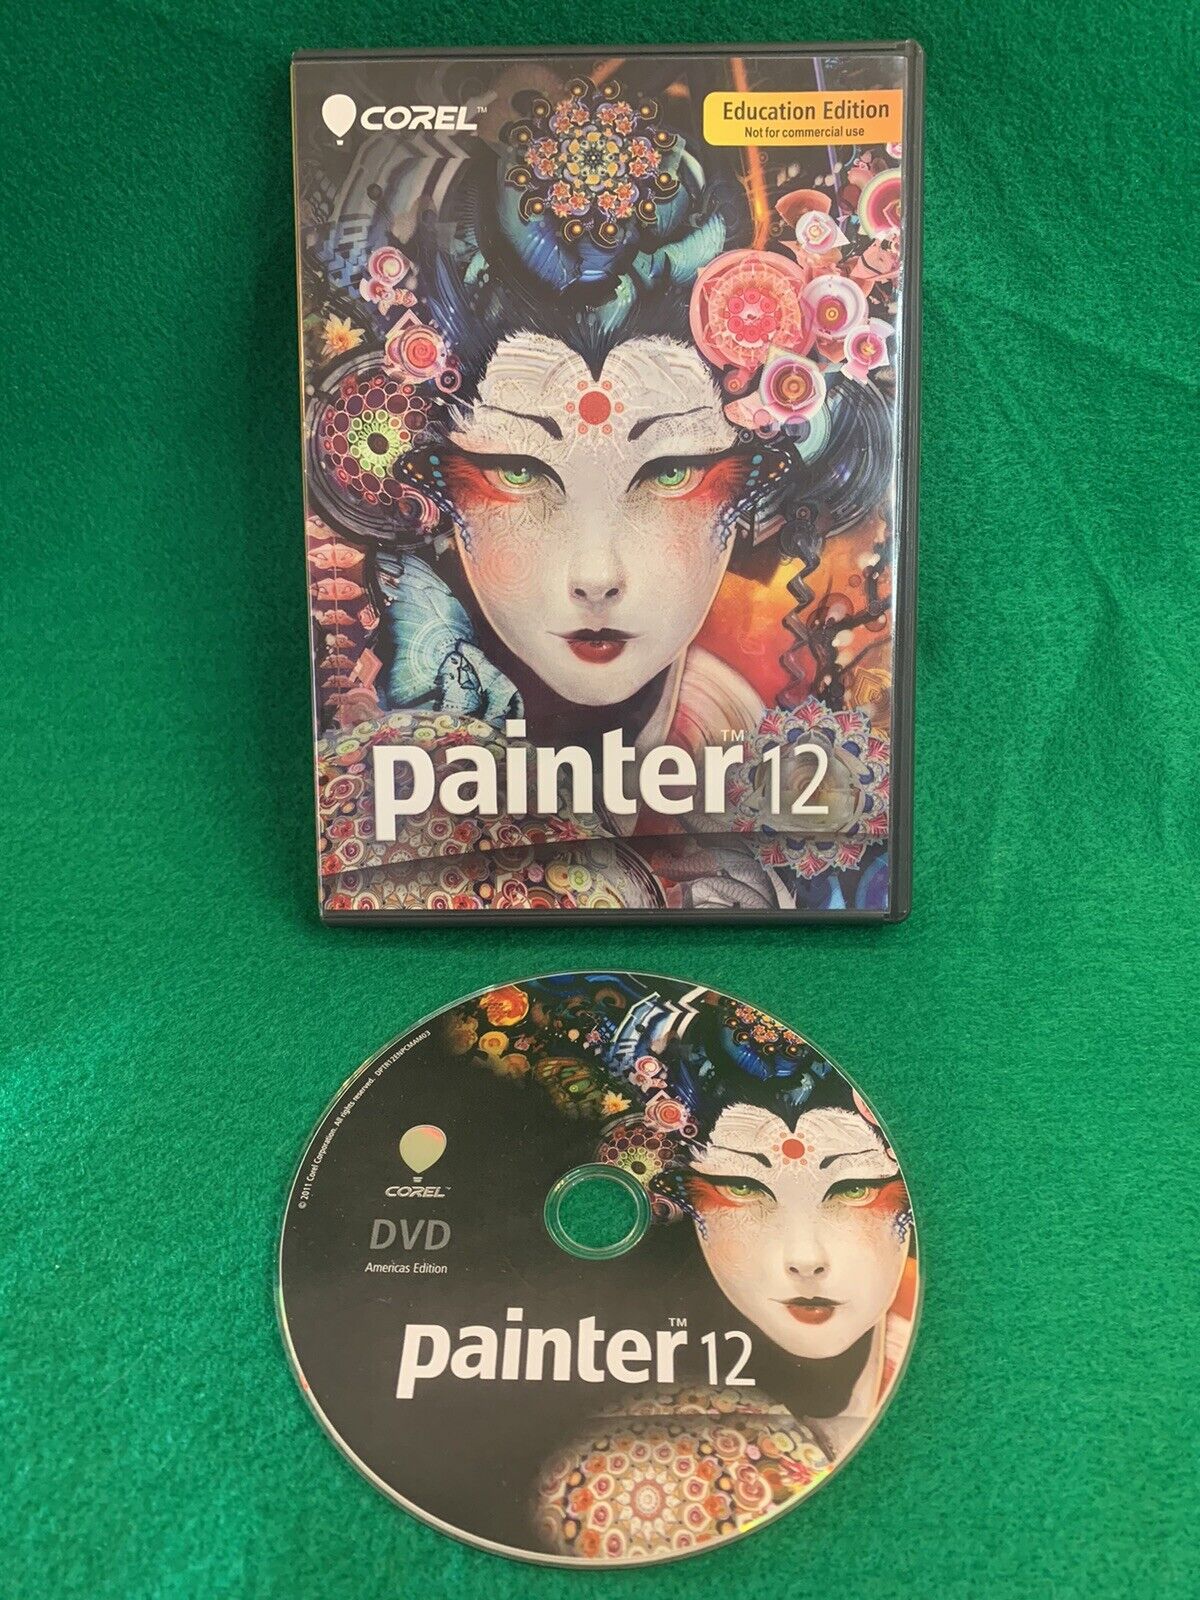 Corel Painter 12 for Education Edition (PC, 2011) Excellent Pre-Owned Condition